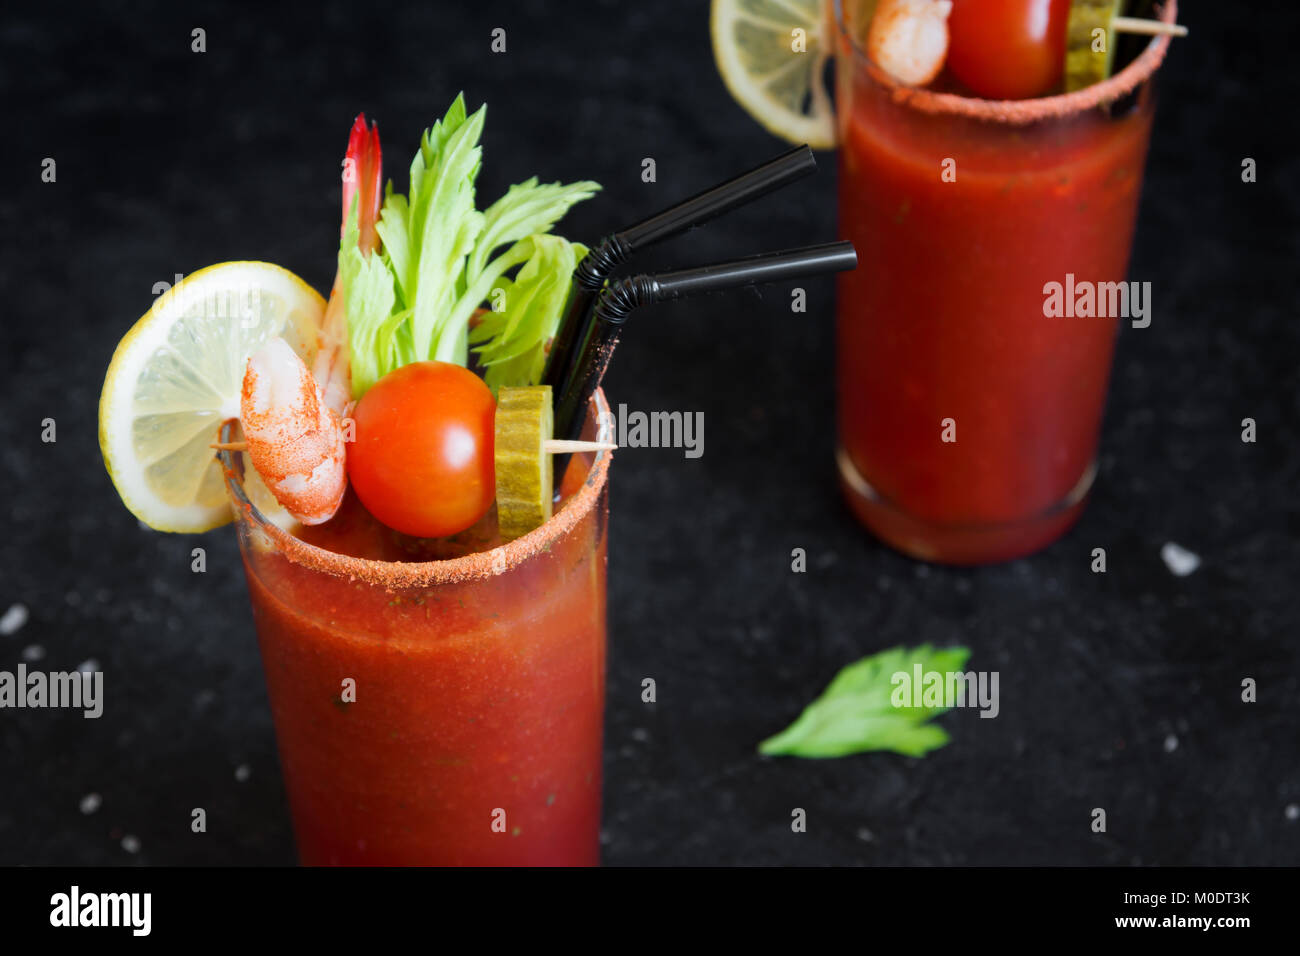 https://c8.alamy.com/comp/M0DT3K/bloody-mary-cocktail-in-glasses-with-garnishes-tomato-bloody-mary-M0DT3K.jpg